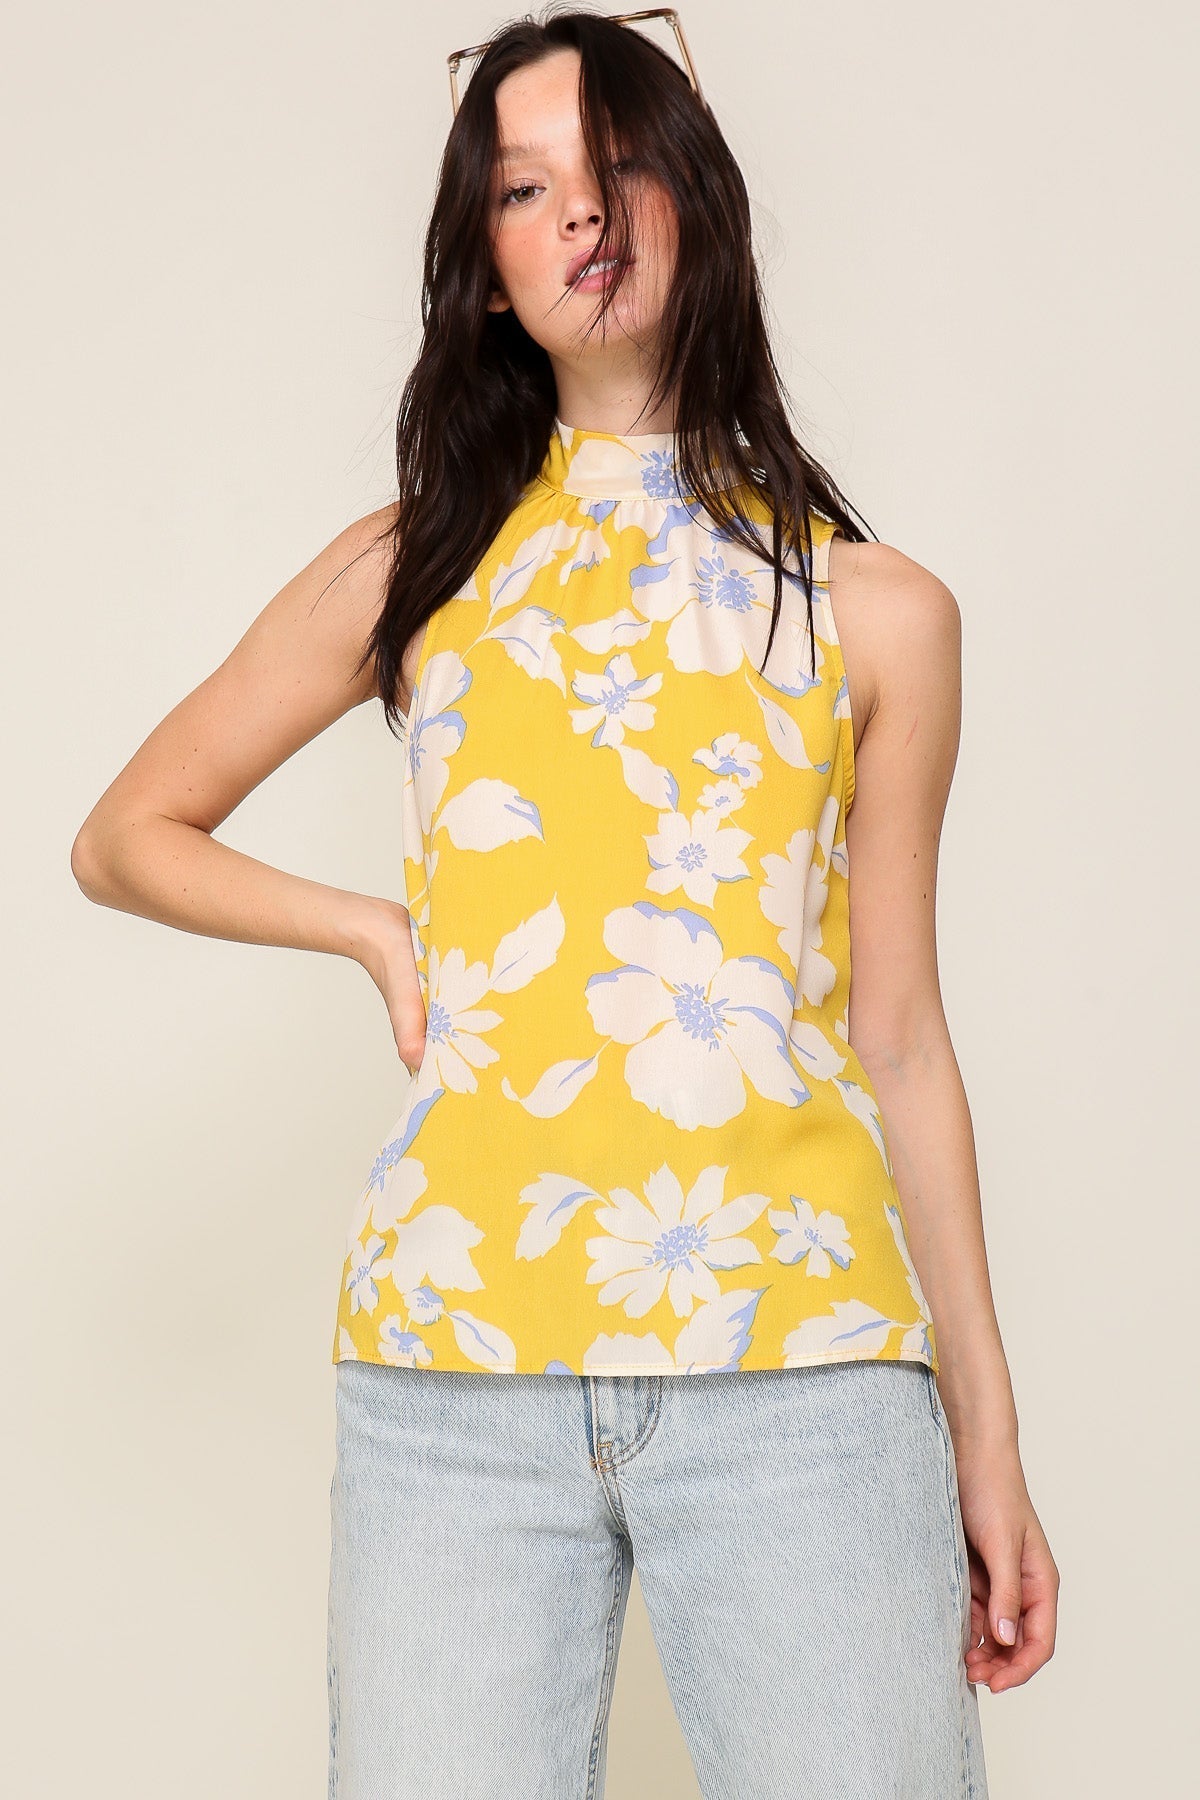 Timing (MN9462R23) Women's Sleeveles High Neck Floral Print Sleeveless Top in Yellow and Cream print